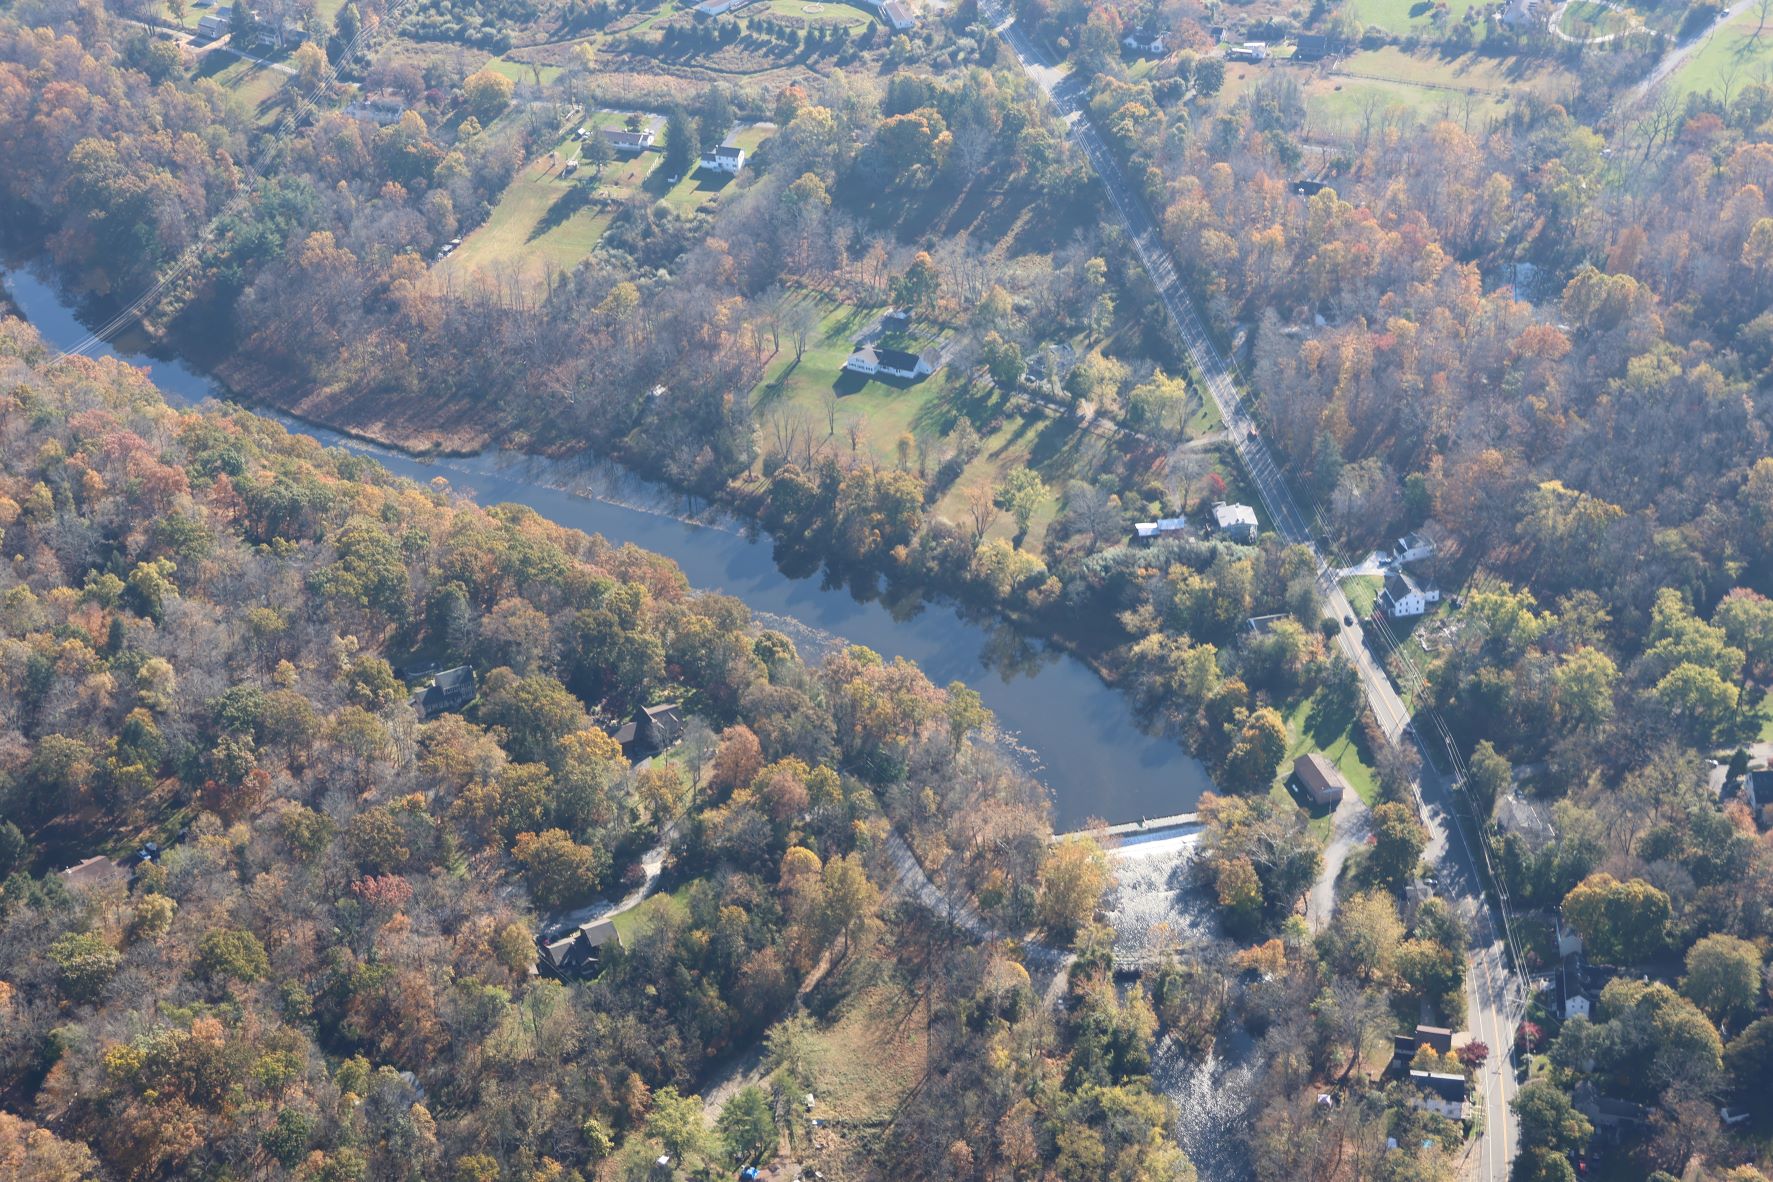 Aerial view of a winding river obstructed by a dam.